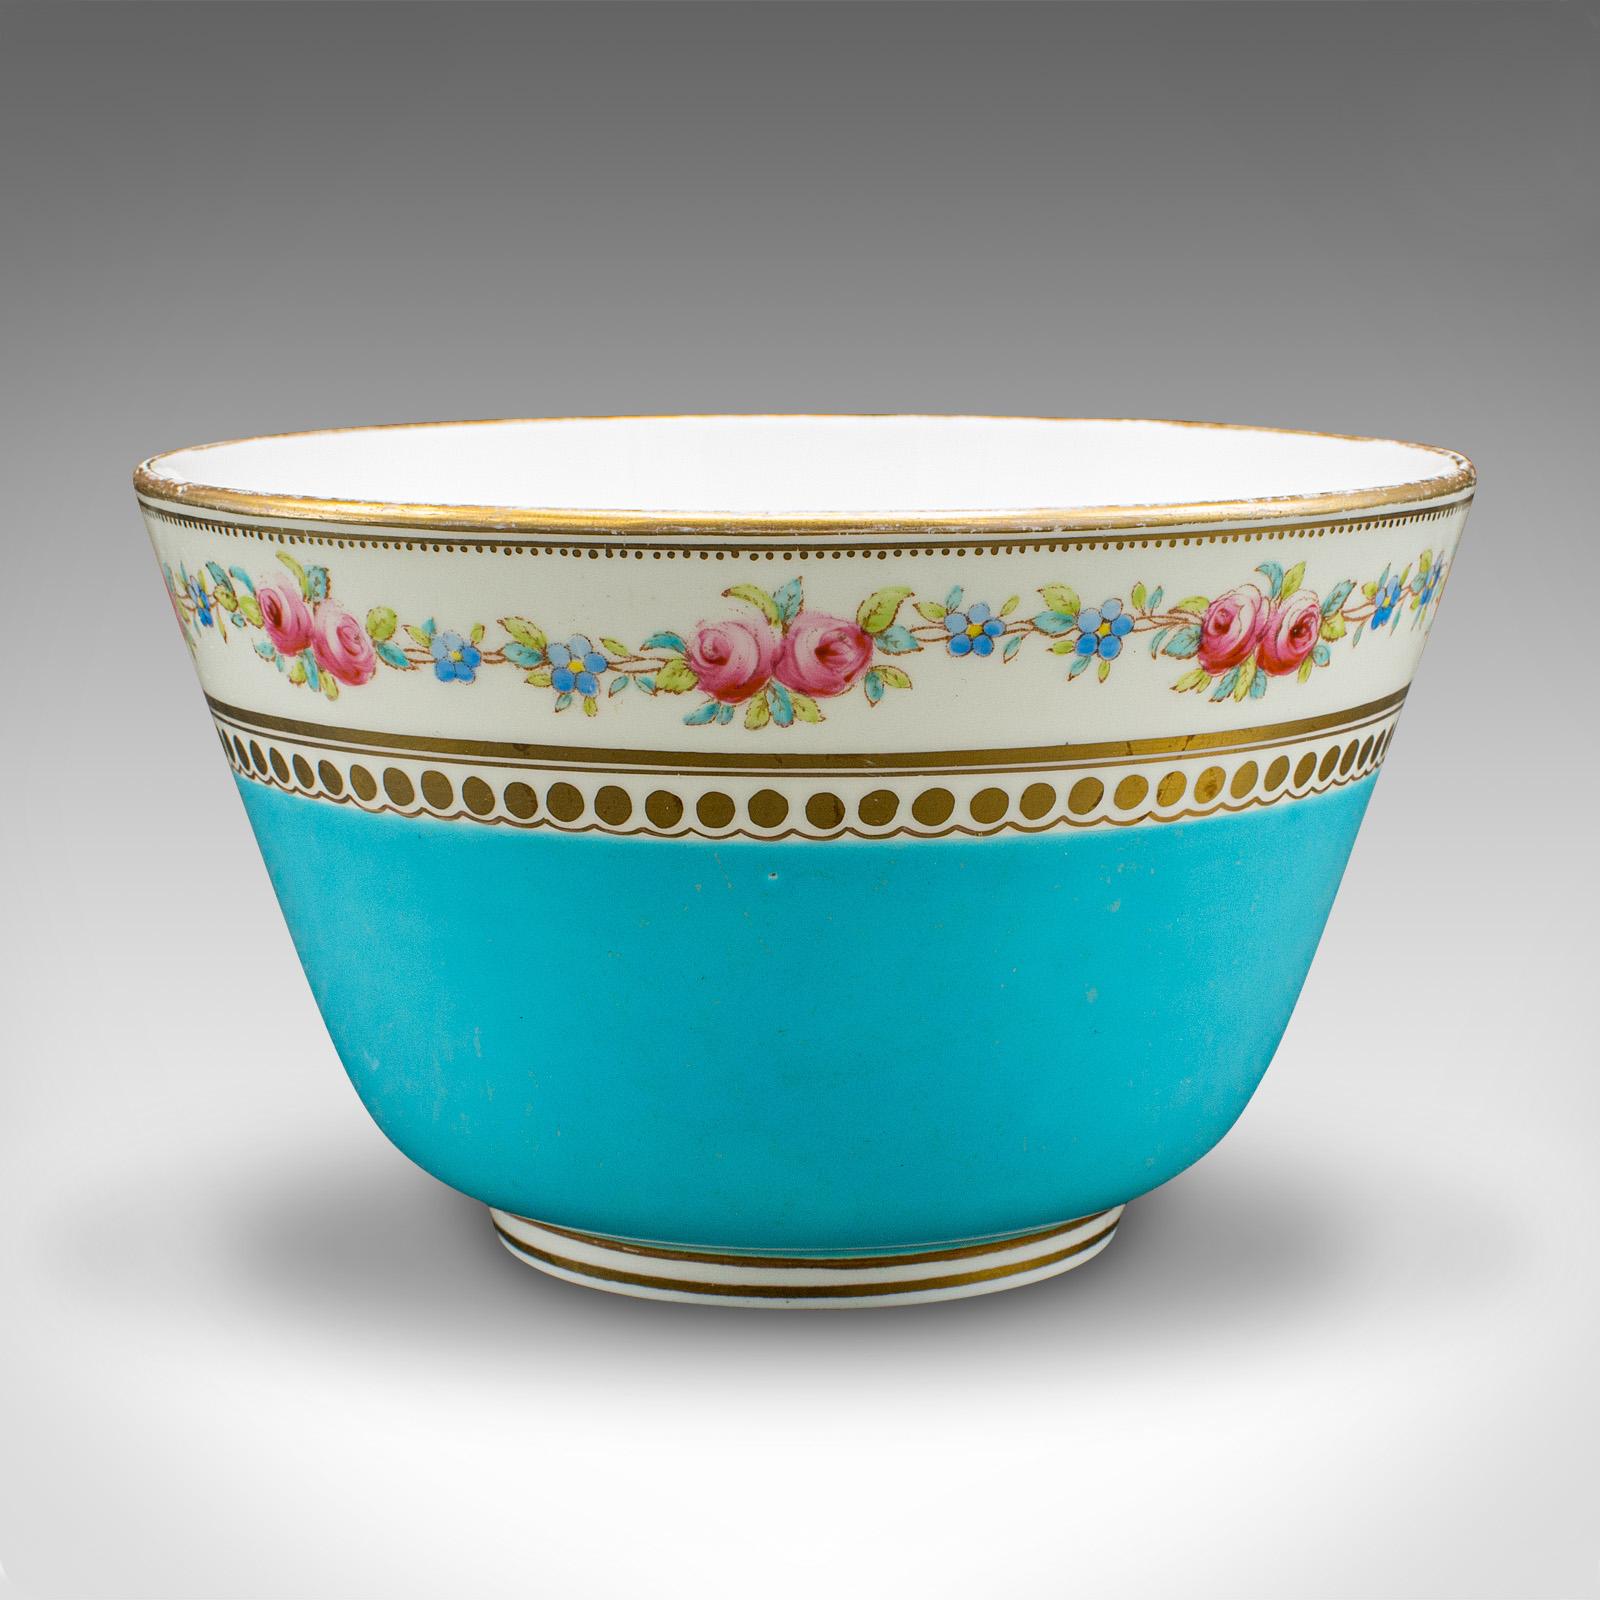 British Antique Sugar Bowl, English, Ceramic, Afternoon Tea Dish, Early 20th Century For Sale